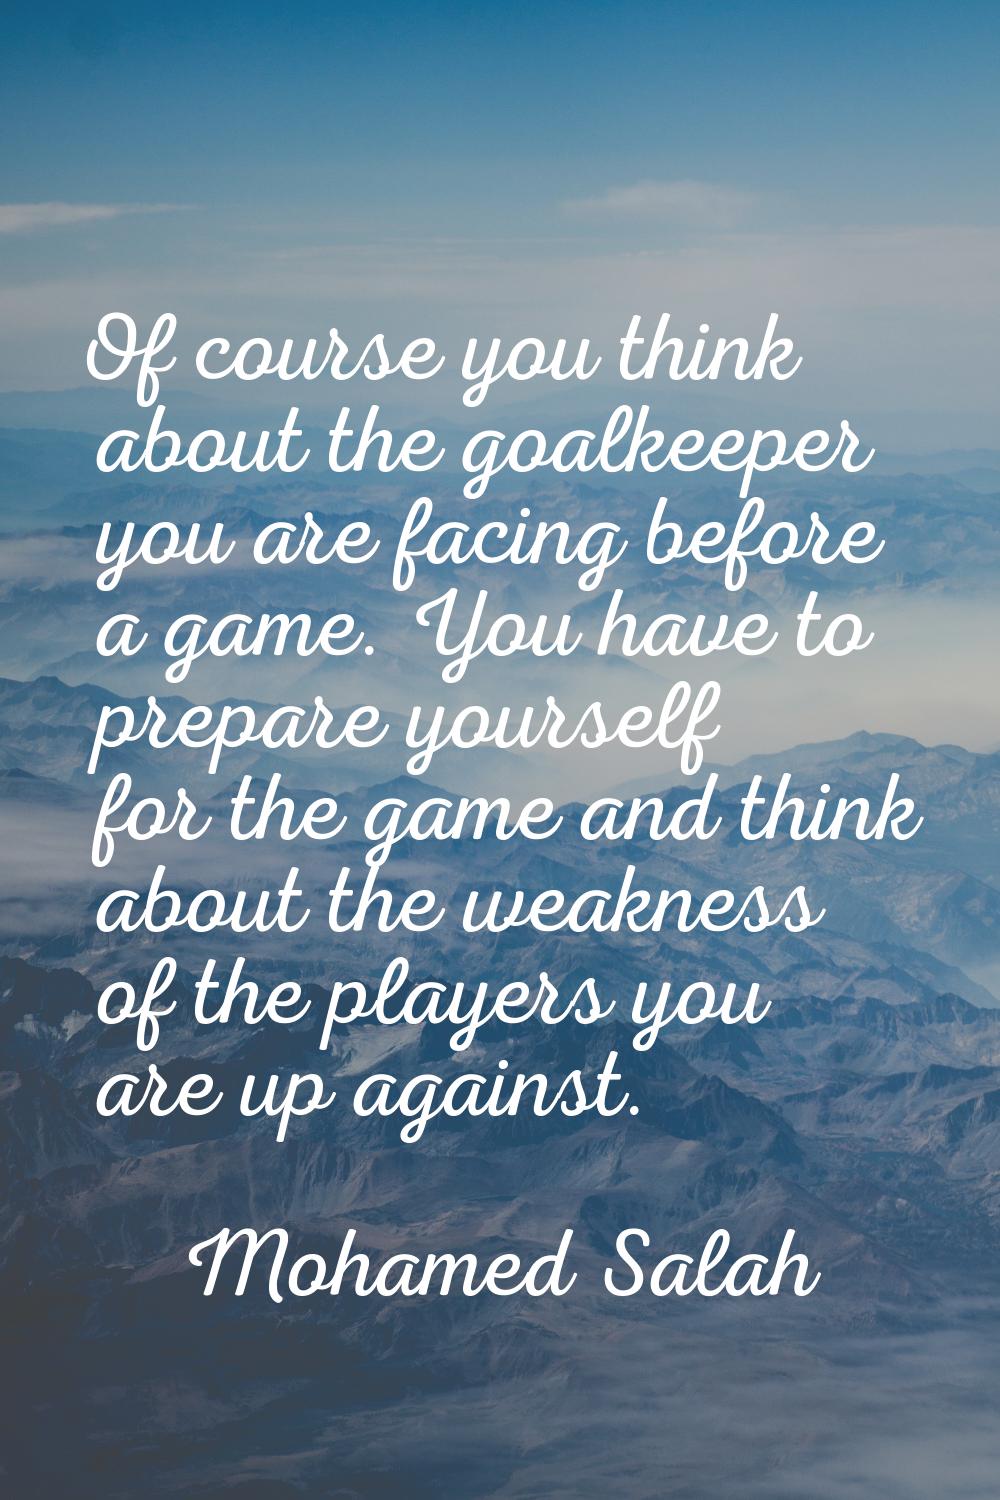 Of course you think about the goalkeeper you are facing before a game. You have to prepare yourself